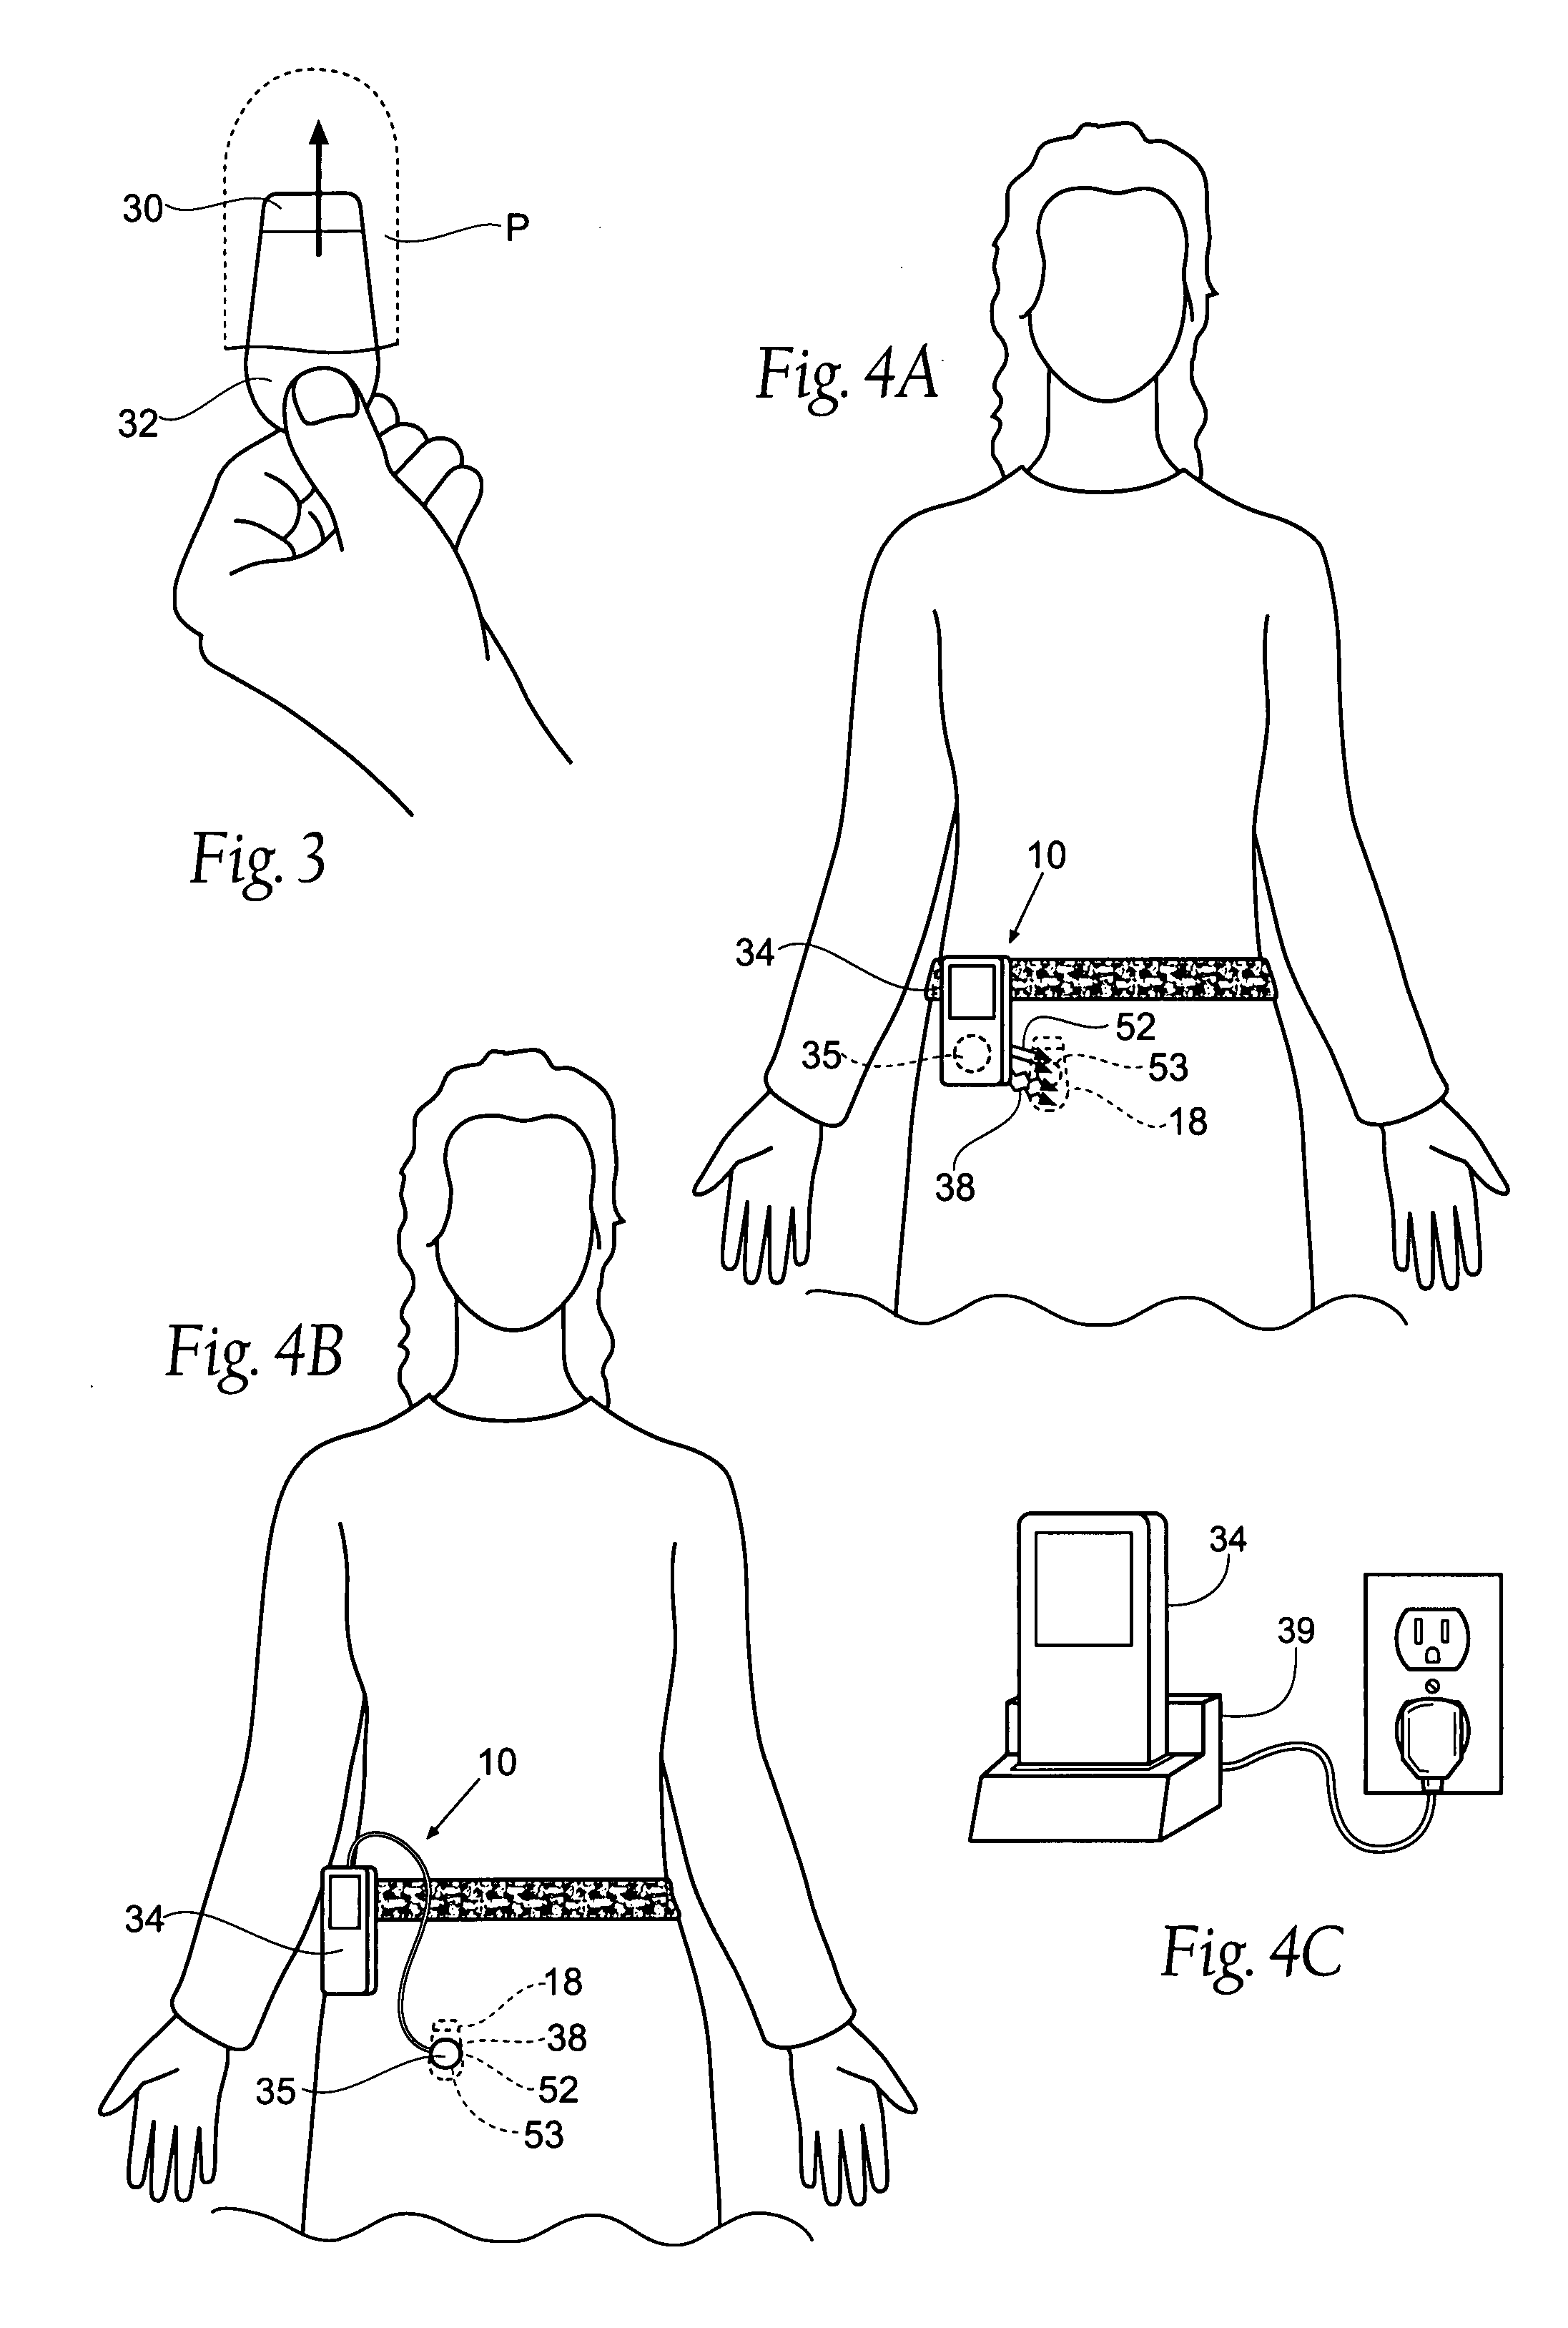 Implantable pulse generator for providing functional and/or therapeutic stimulation of muscles and/or nerves and/or central nervous system tissue